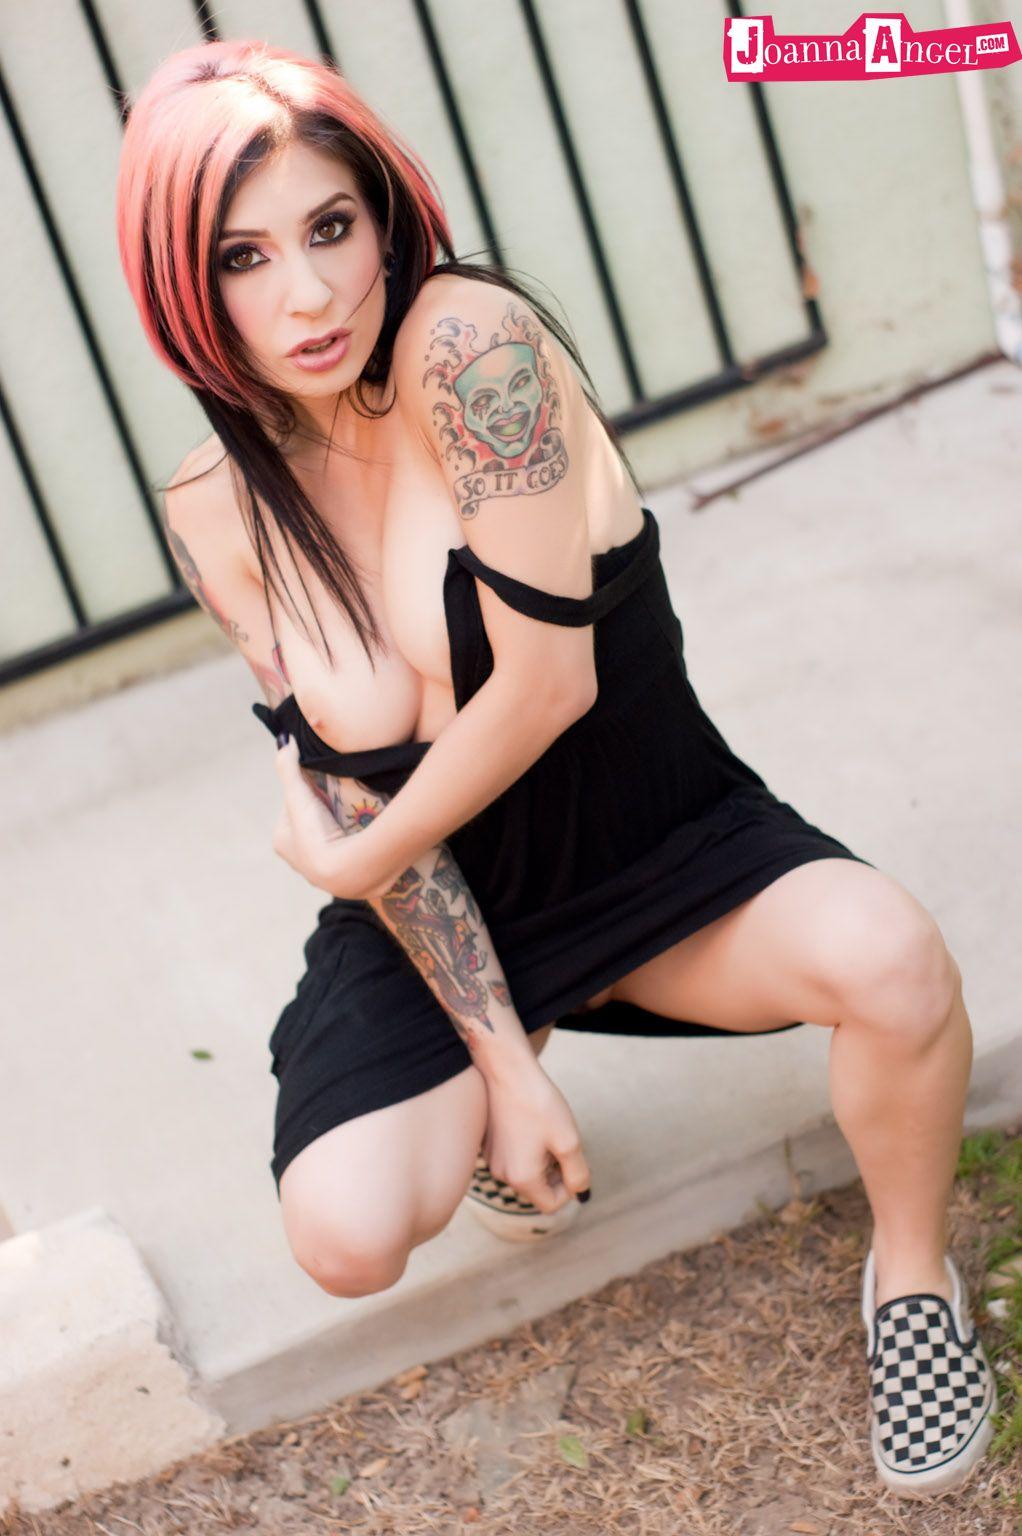 Pictures of Joanna Angel showing her pussy in public #55528955